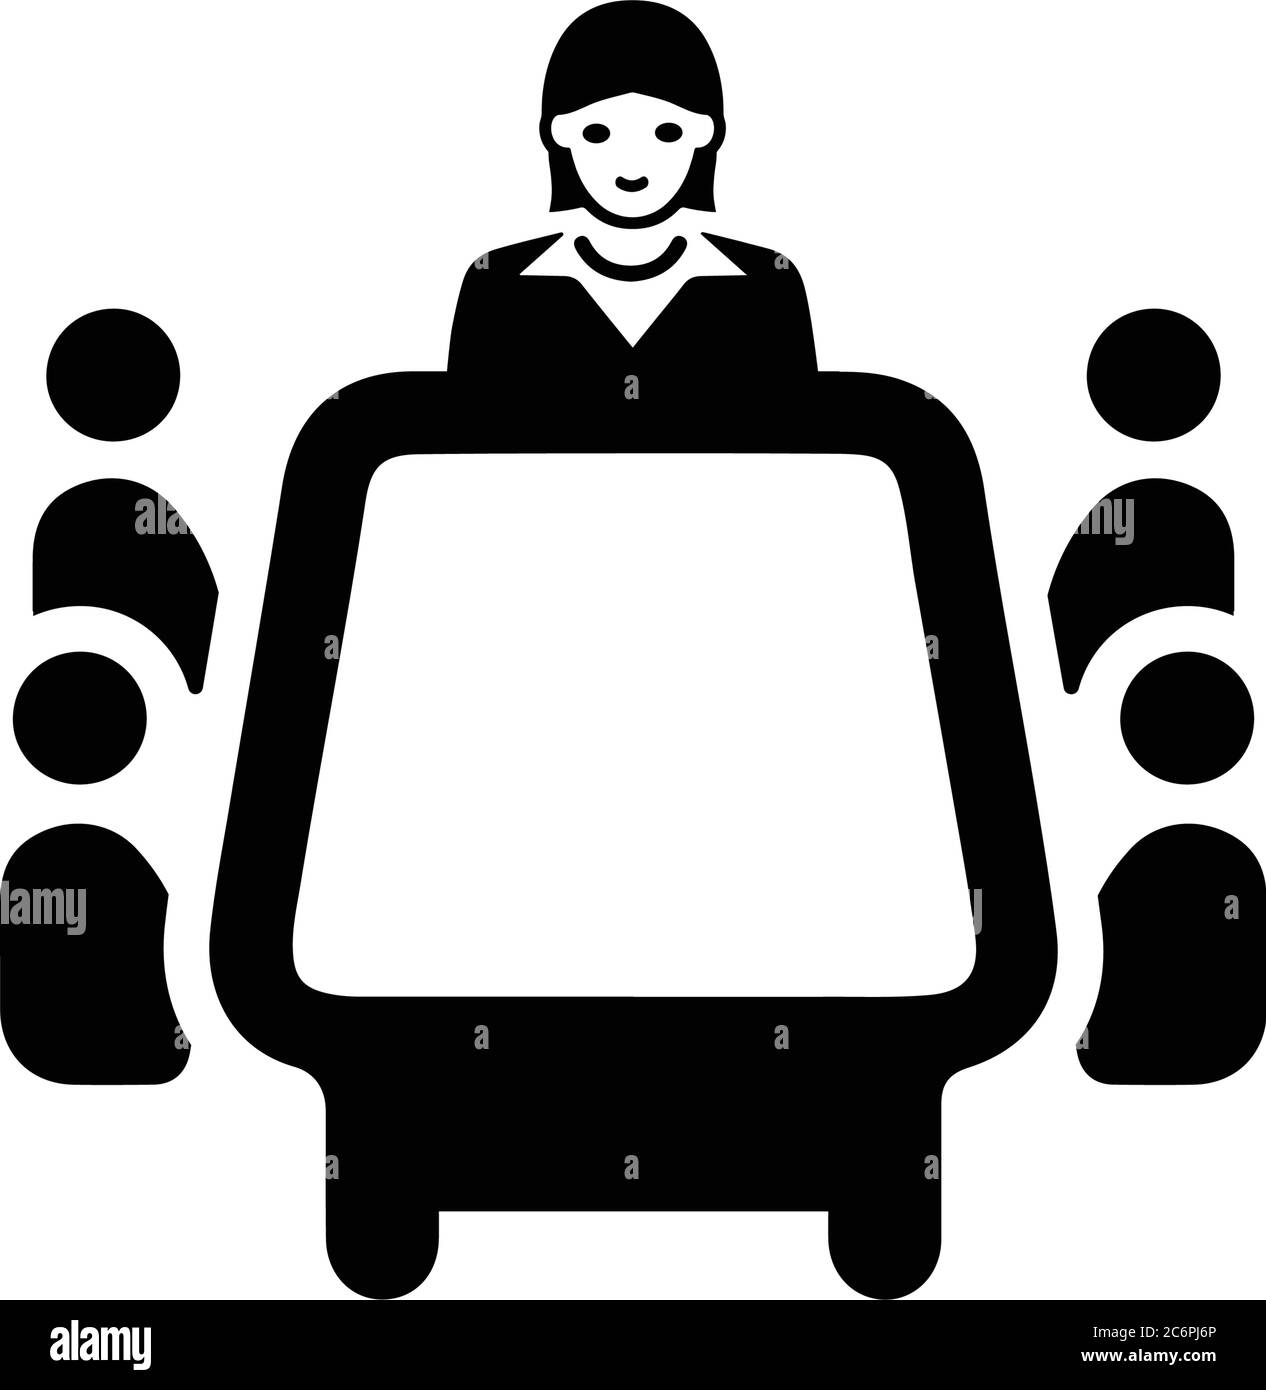 Business board meeting icon. Beautiful, meticulously designed icon. Well organized and editable Vector for any uses. Stock Vector